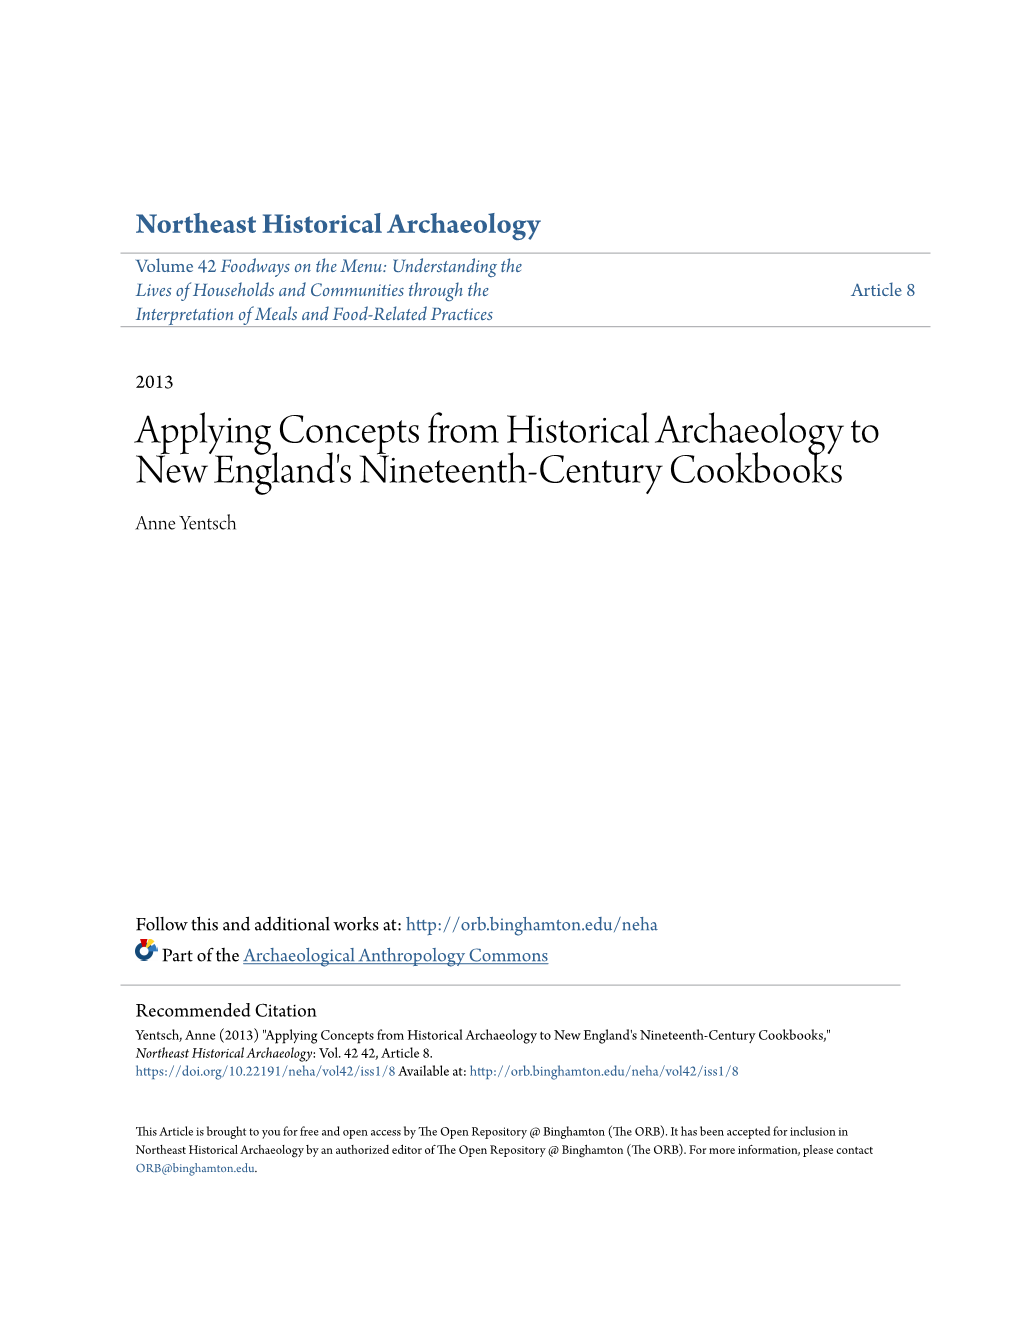 Applying Concepts from Historical Archaeology to New England's Nineteenth-Century Cookbooks Anne Yentsch